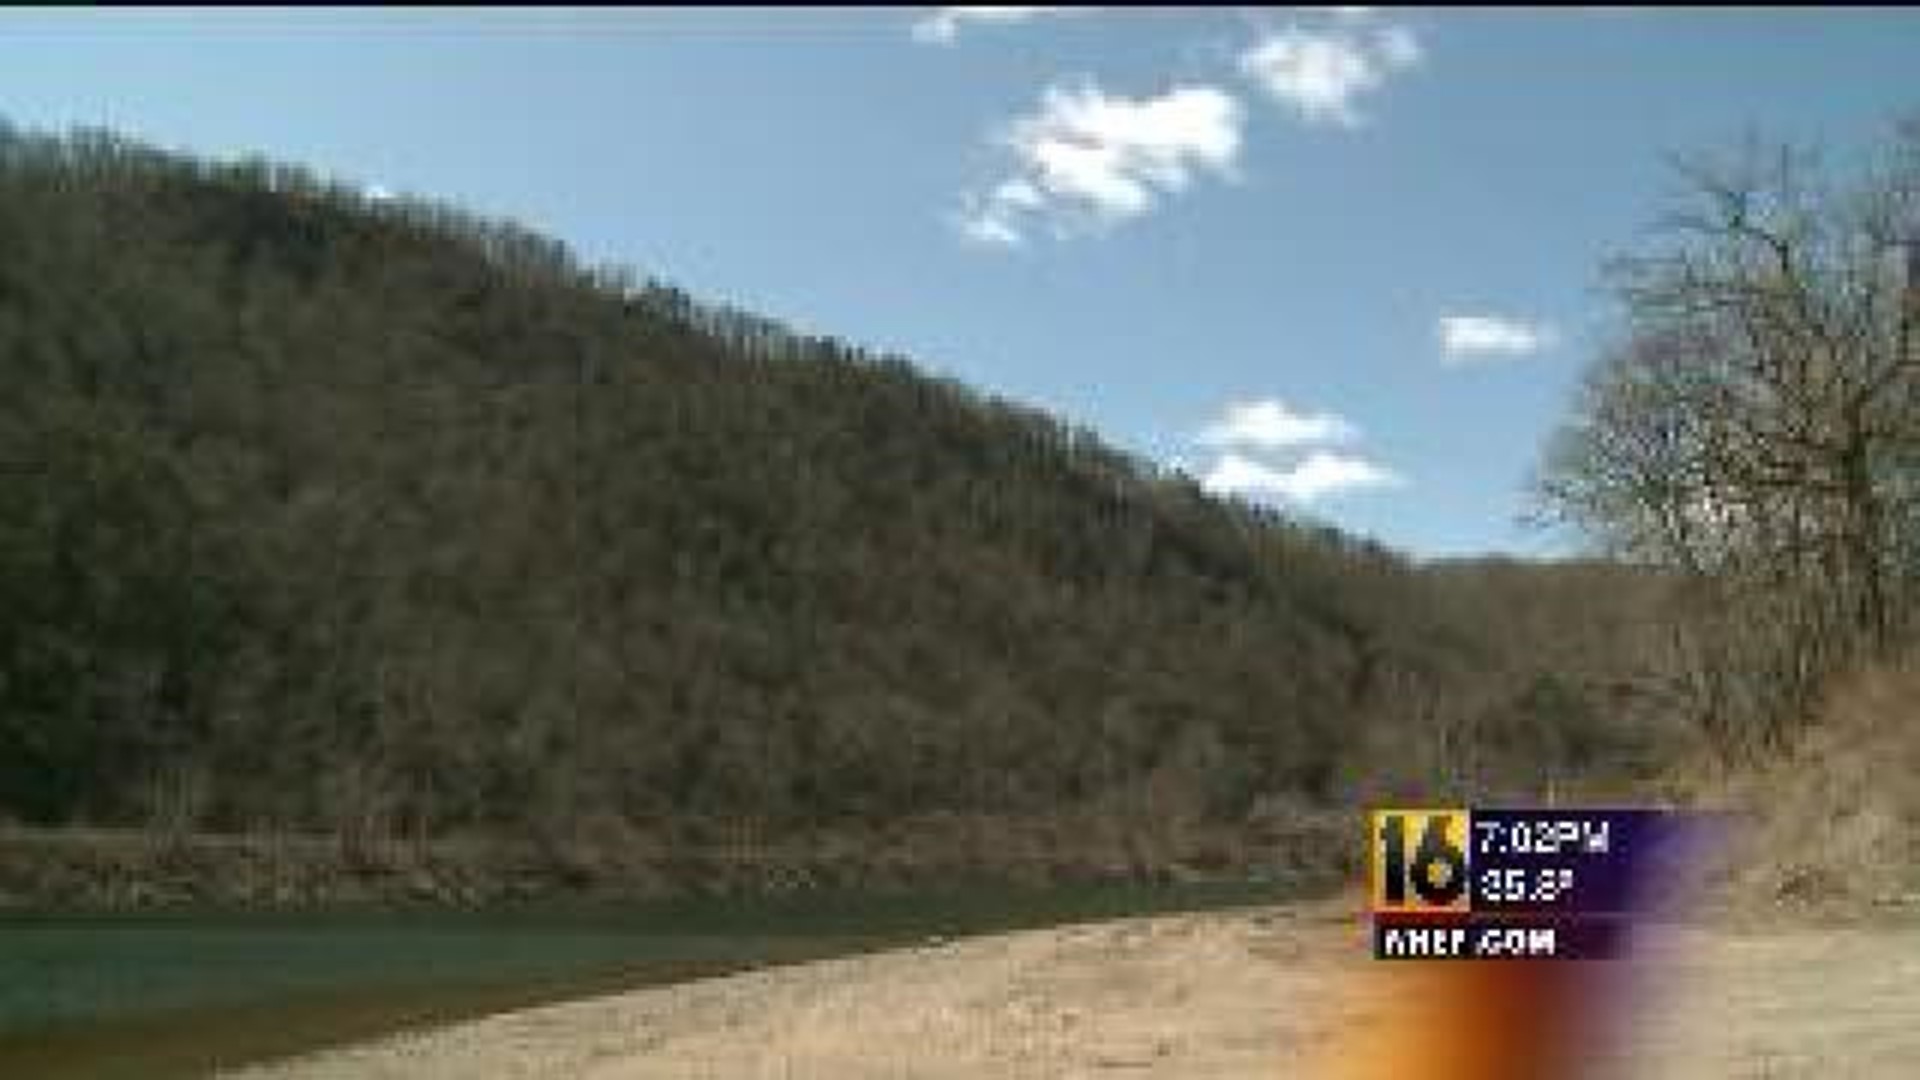 Federal Budget Cuts Affecting National Park